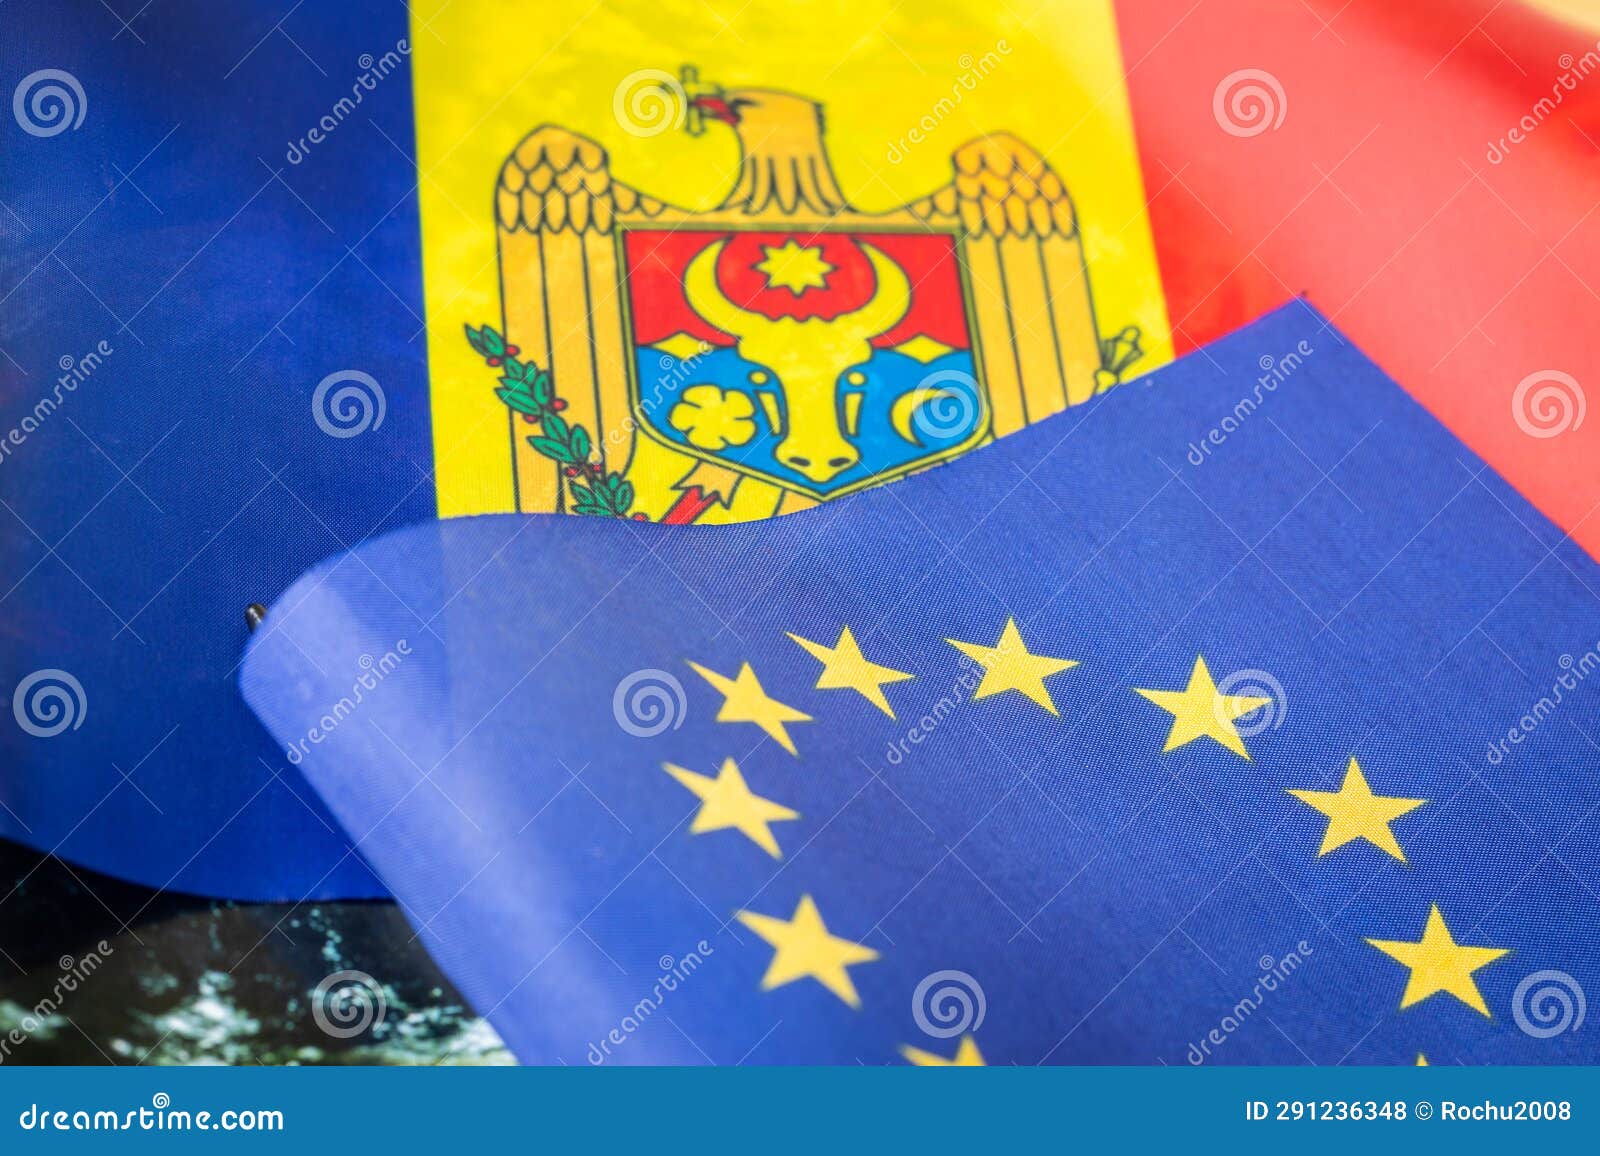 flag of moldova and the european union, concept, hope and work on moldova' accession to the eu, economy and european policy